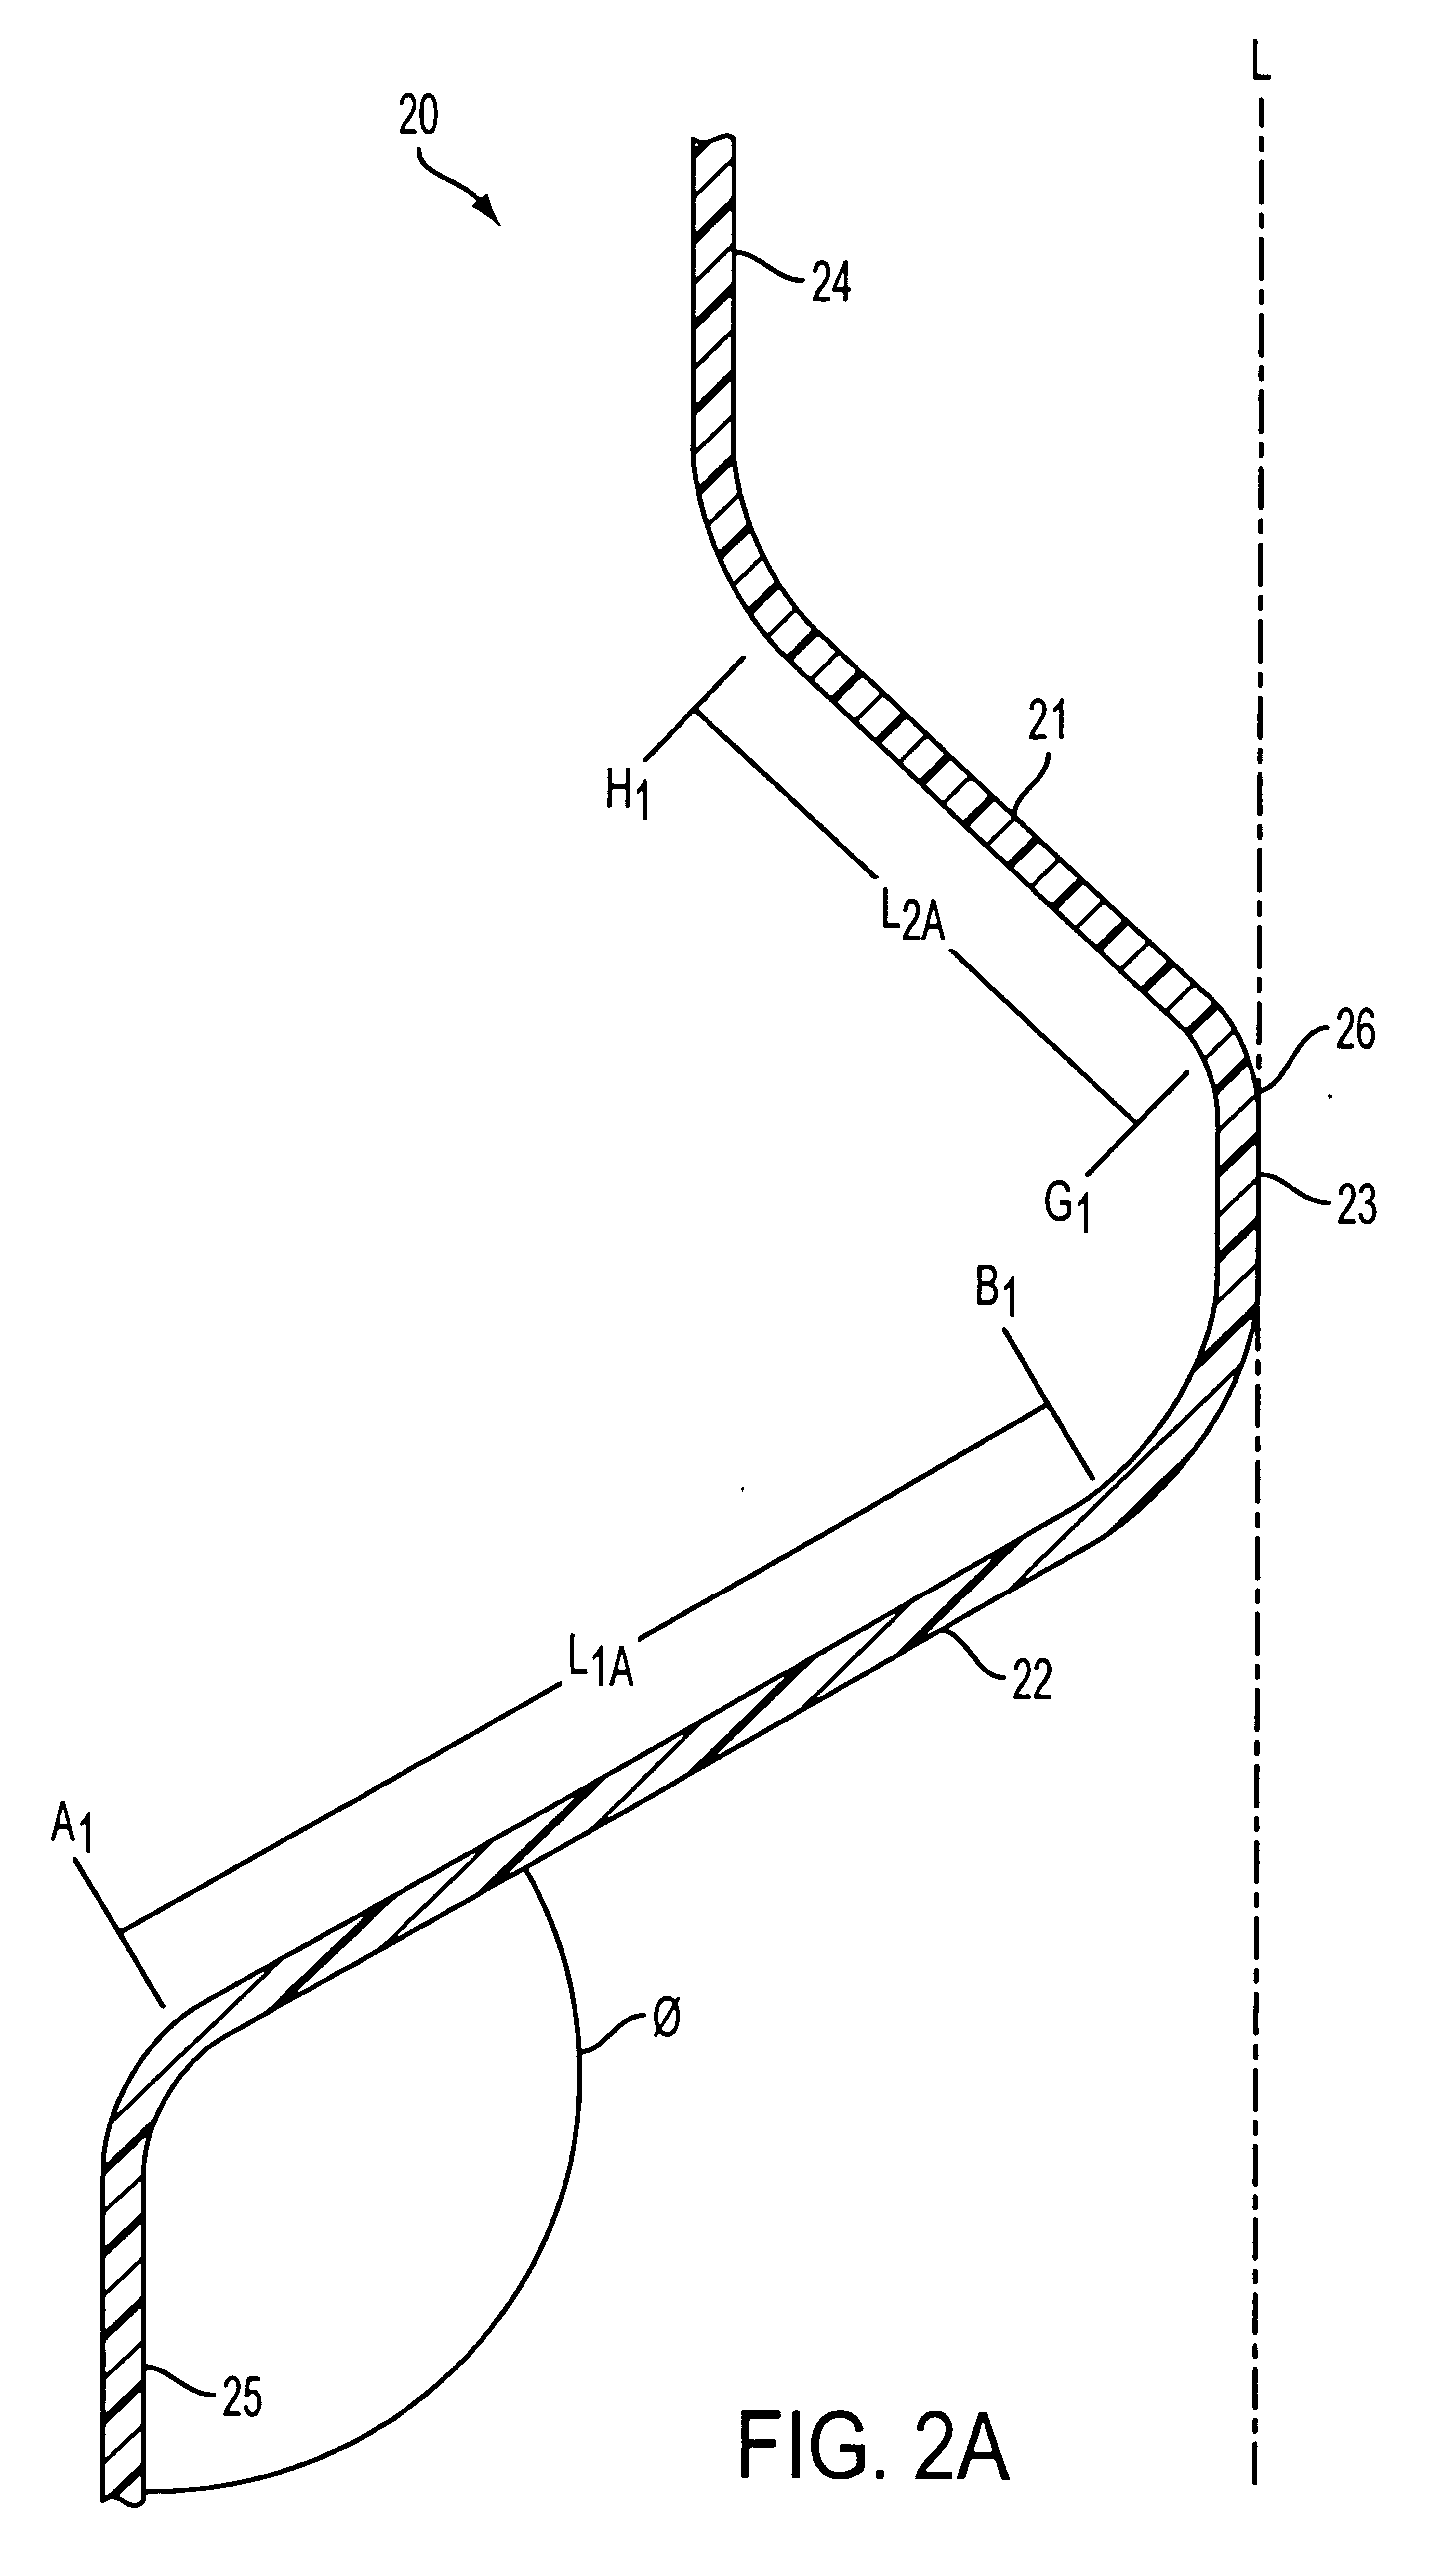 Container having controlled top load characteristics